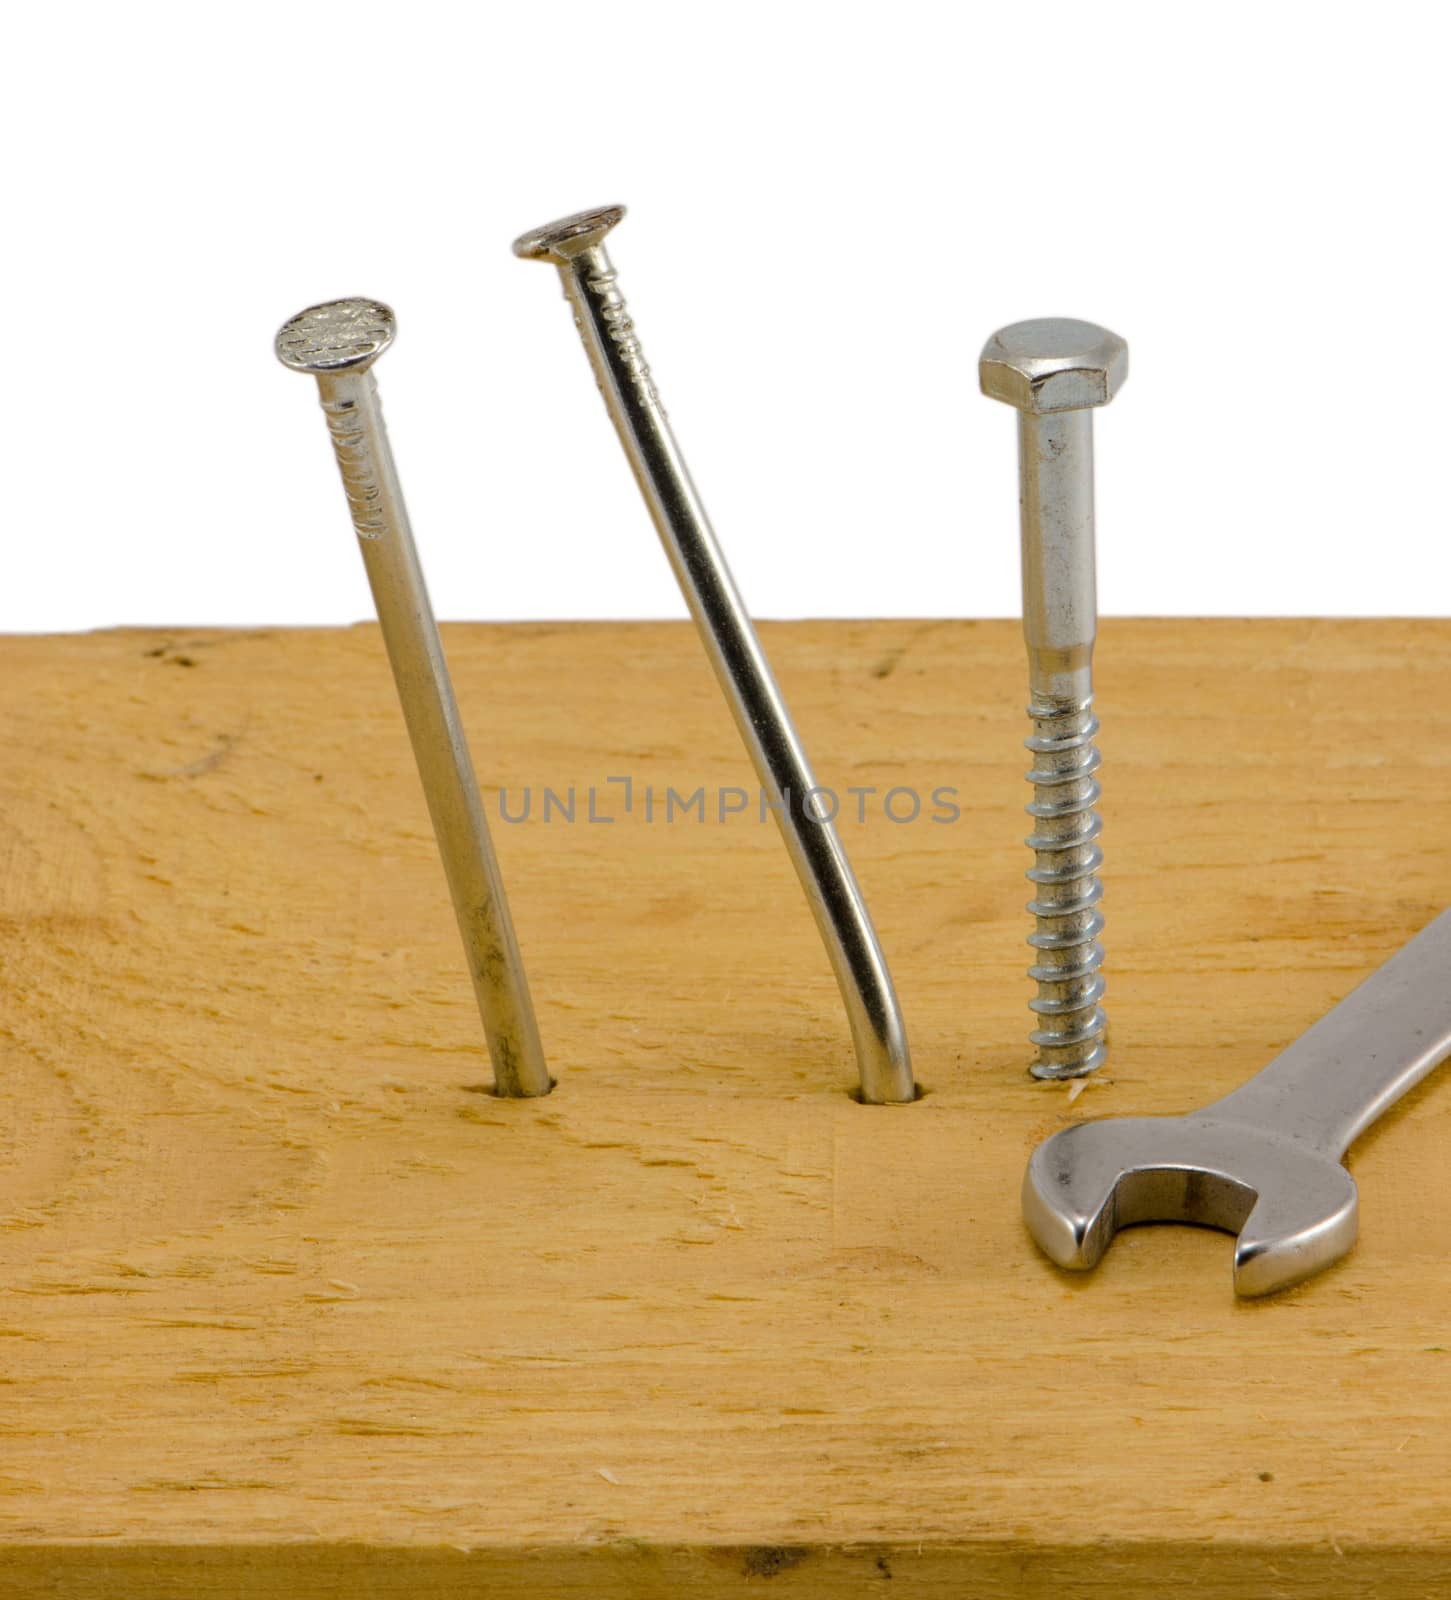 bend nails hammered to board and screw bolt with wrench tool head isolated on white background.